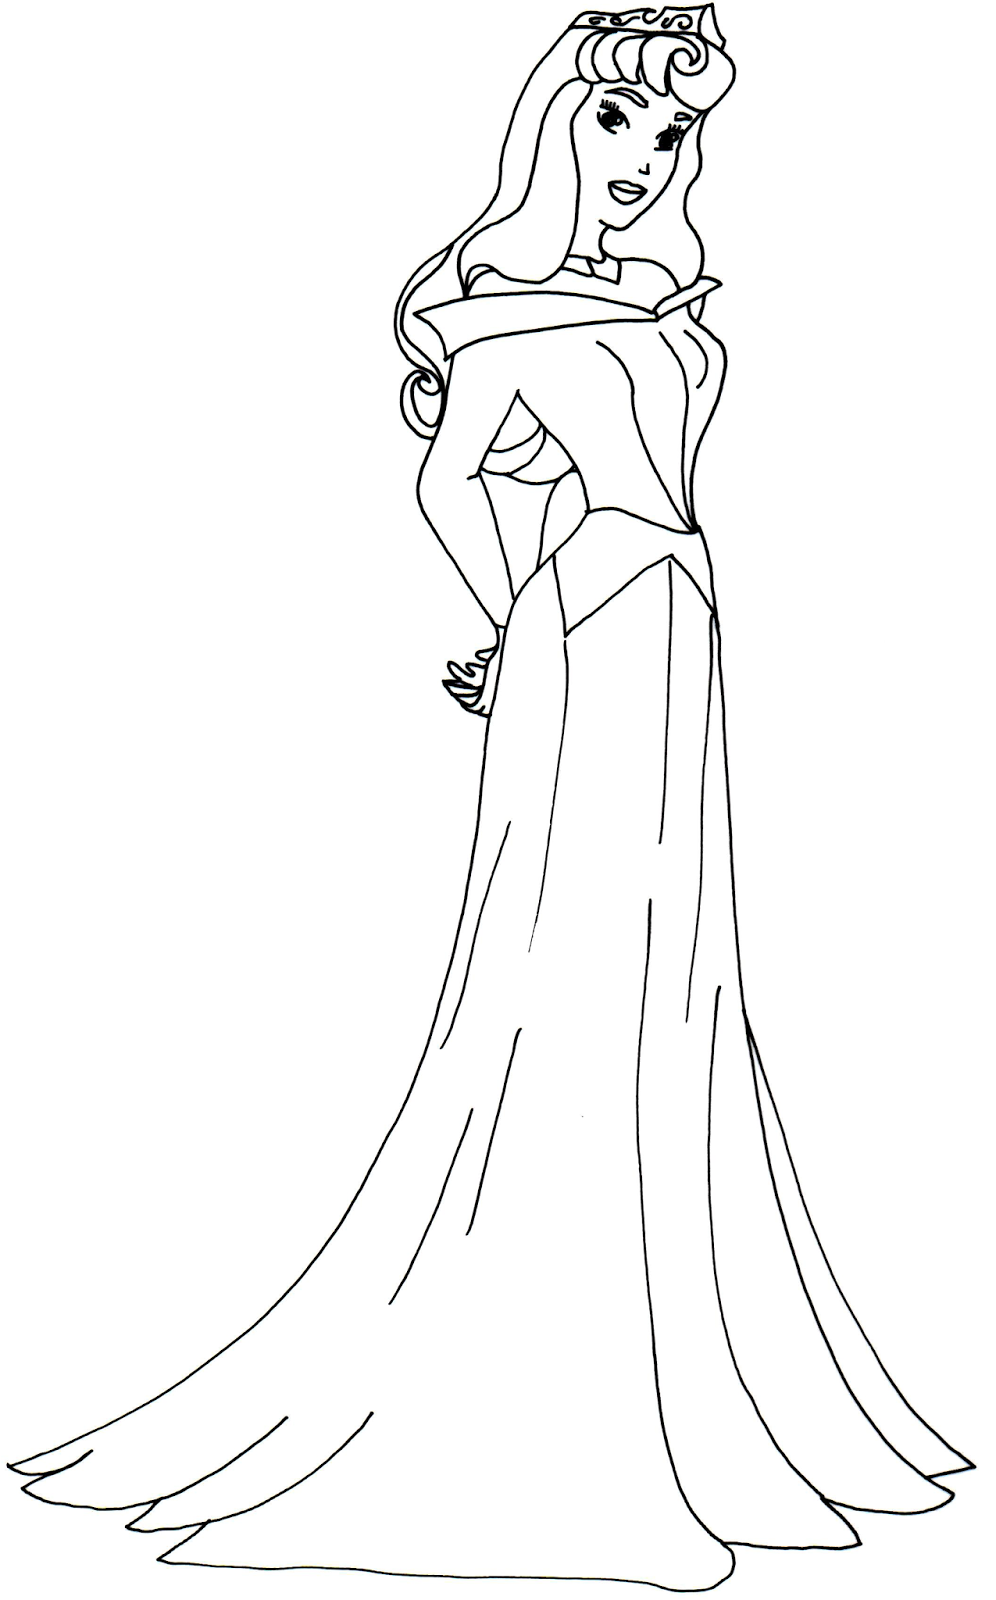 Sofia The First Coloring Pages: Princess Aurora Sofia the ...